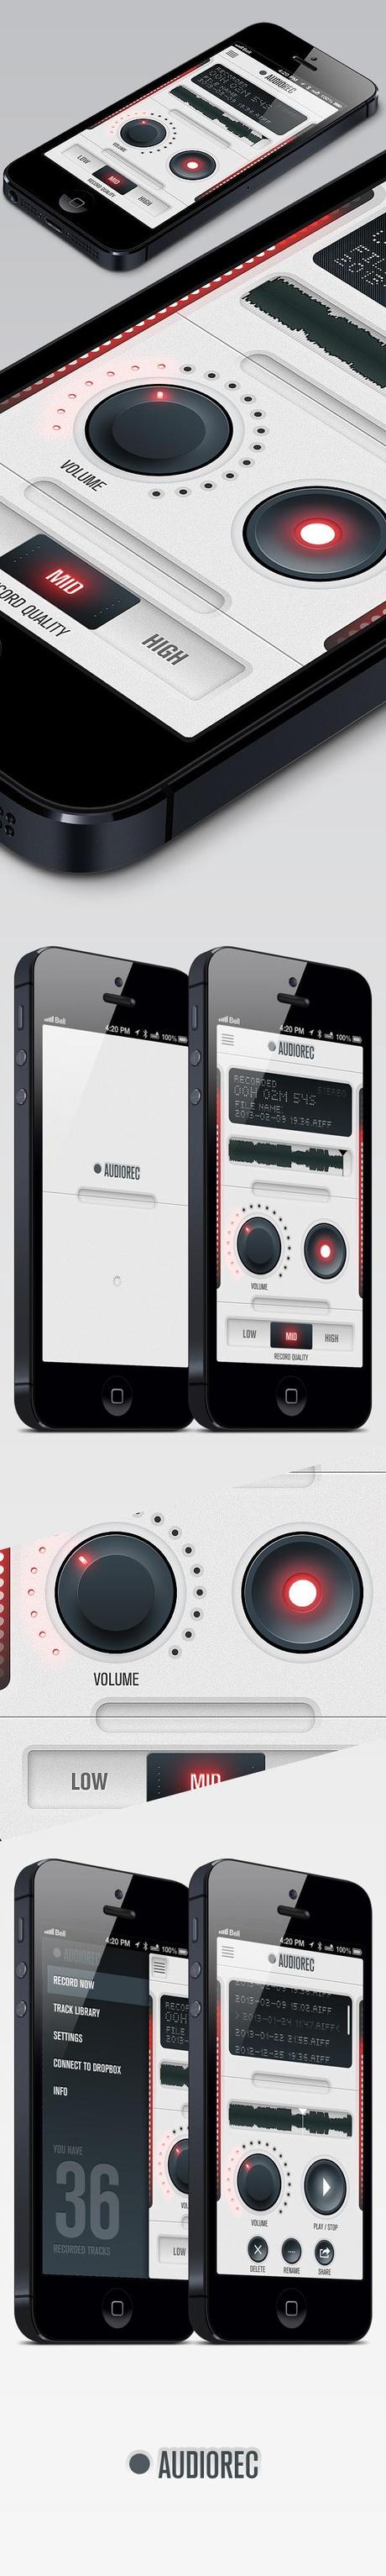 AudioRec UI by Miguel Pires - Stunning Interface Elements From Mobile Apps, Applications & Webpages